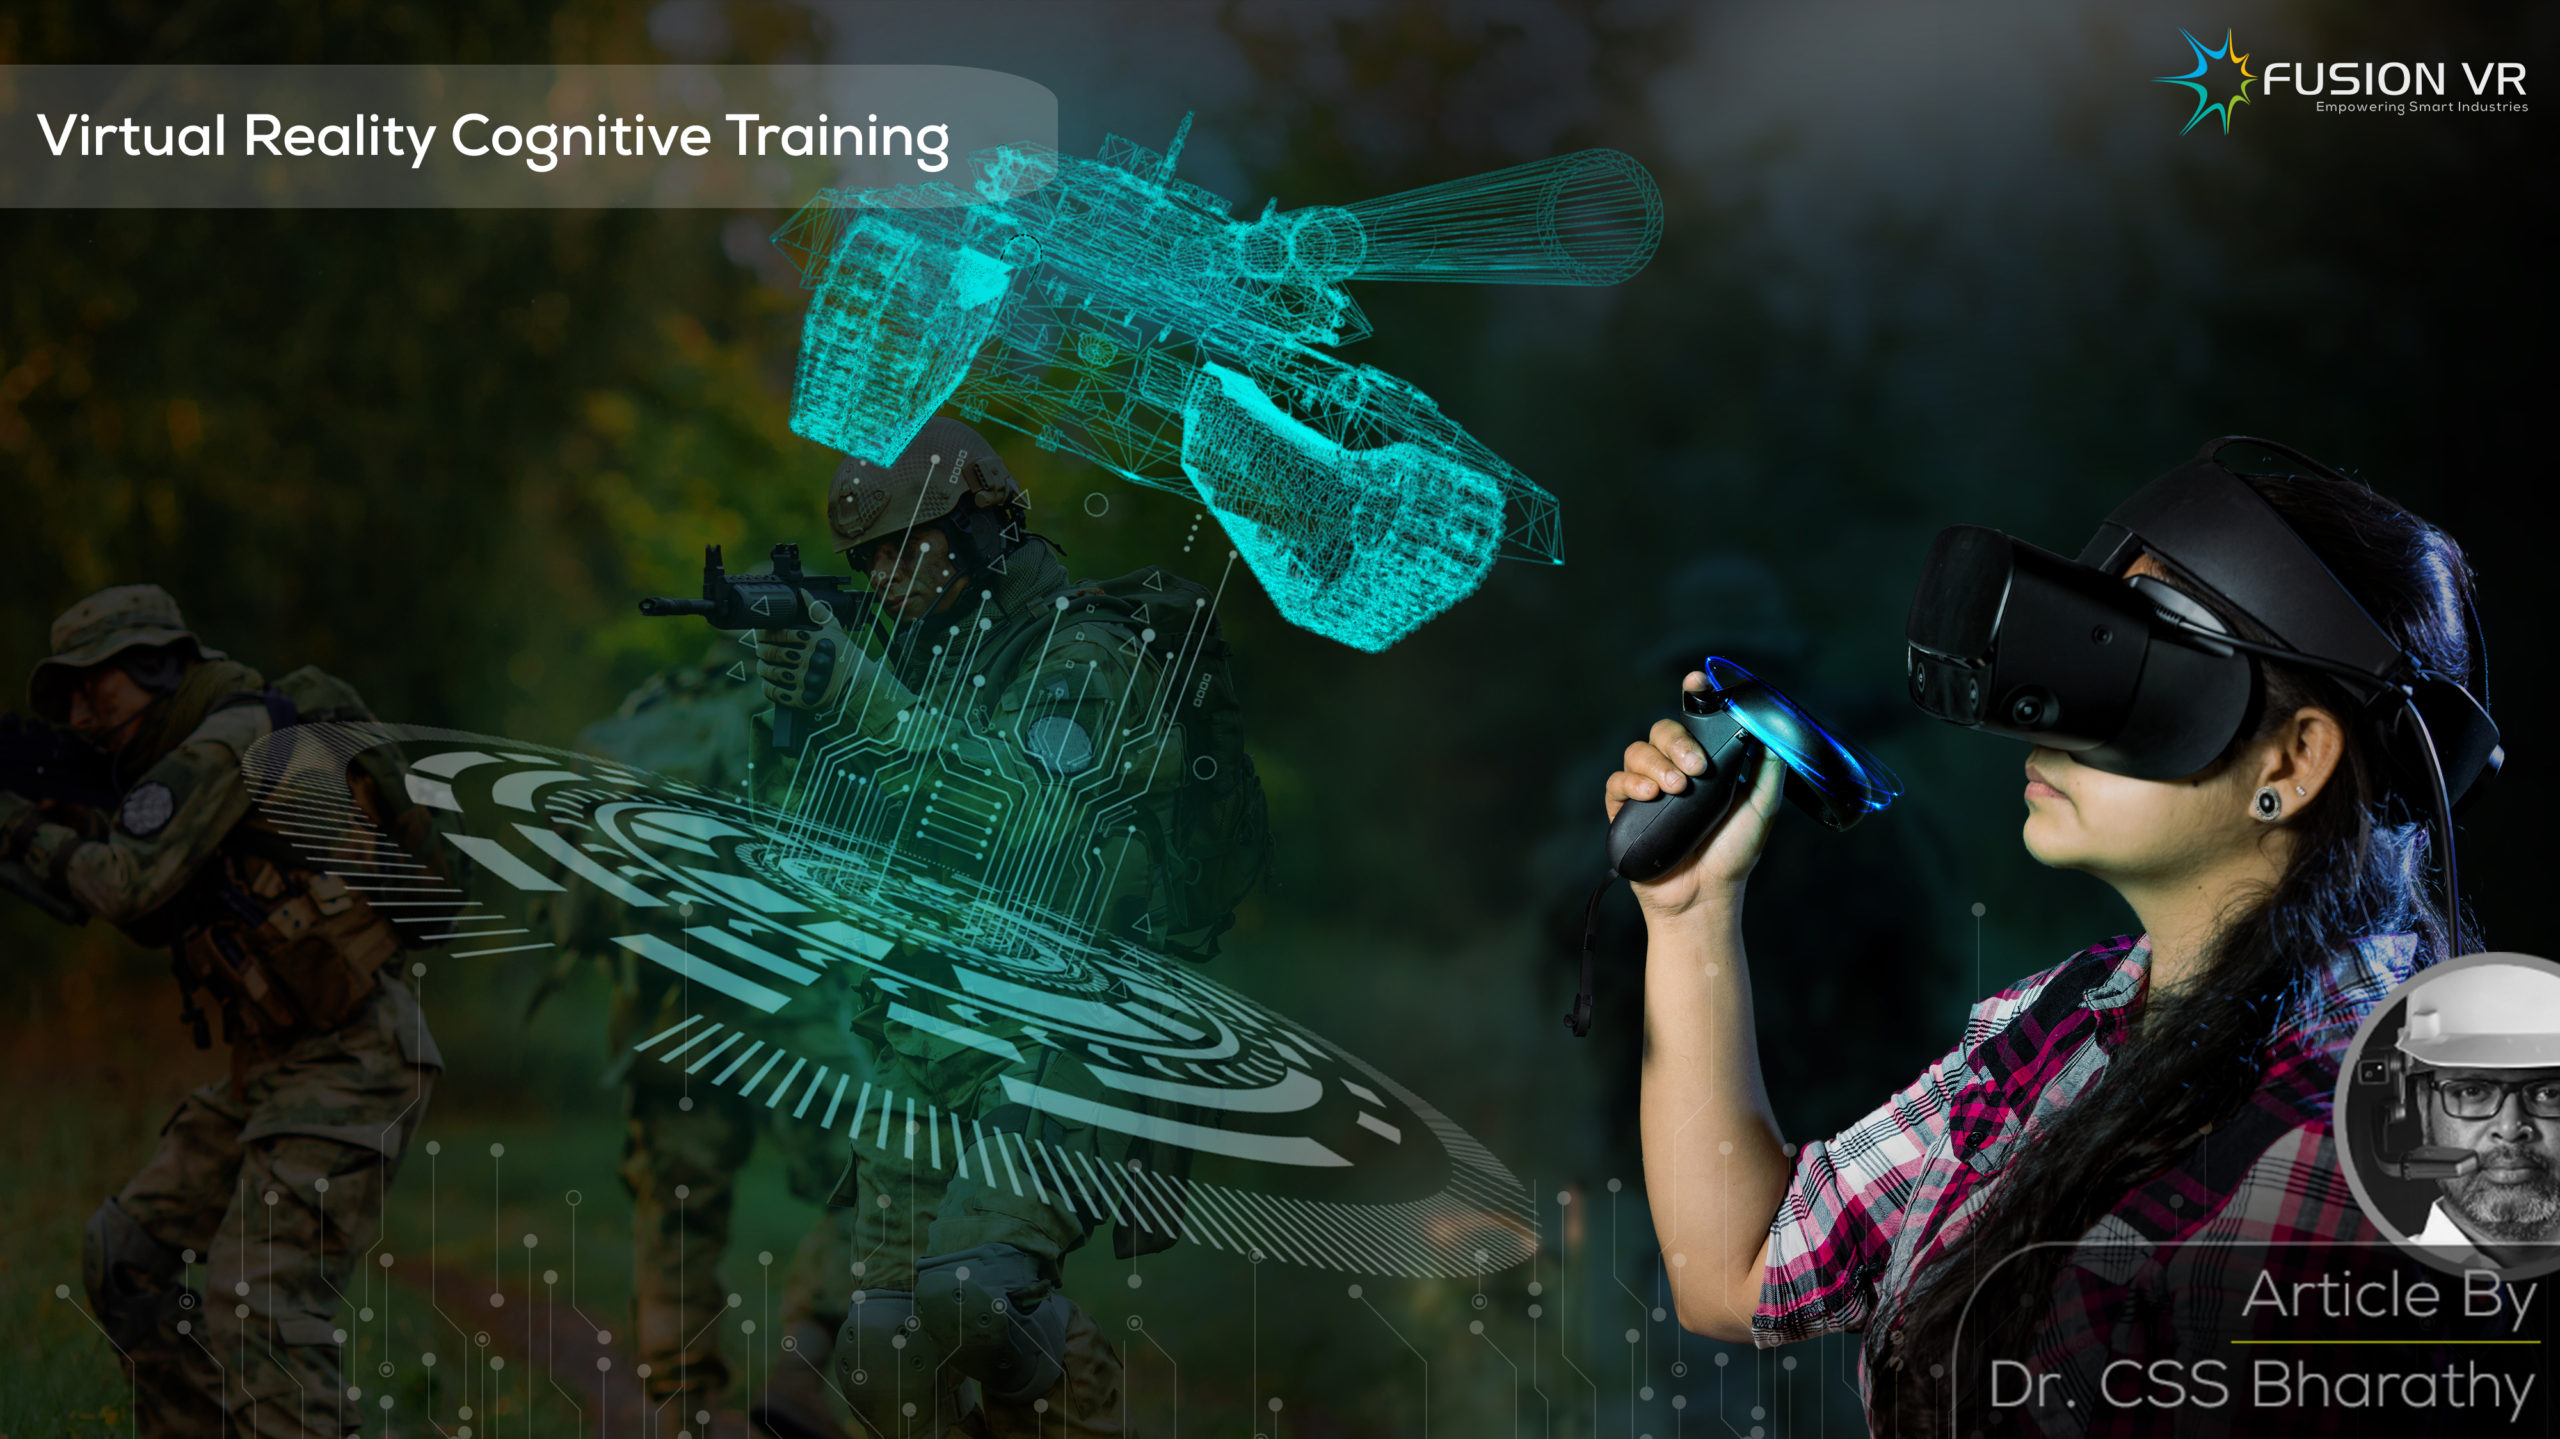 Cognitive Training Helps Embrace The Power of Virtual Reality